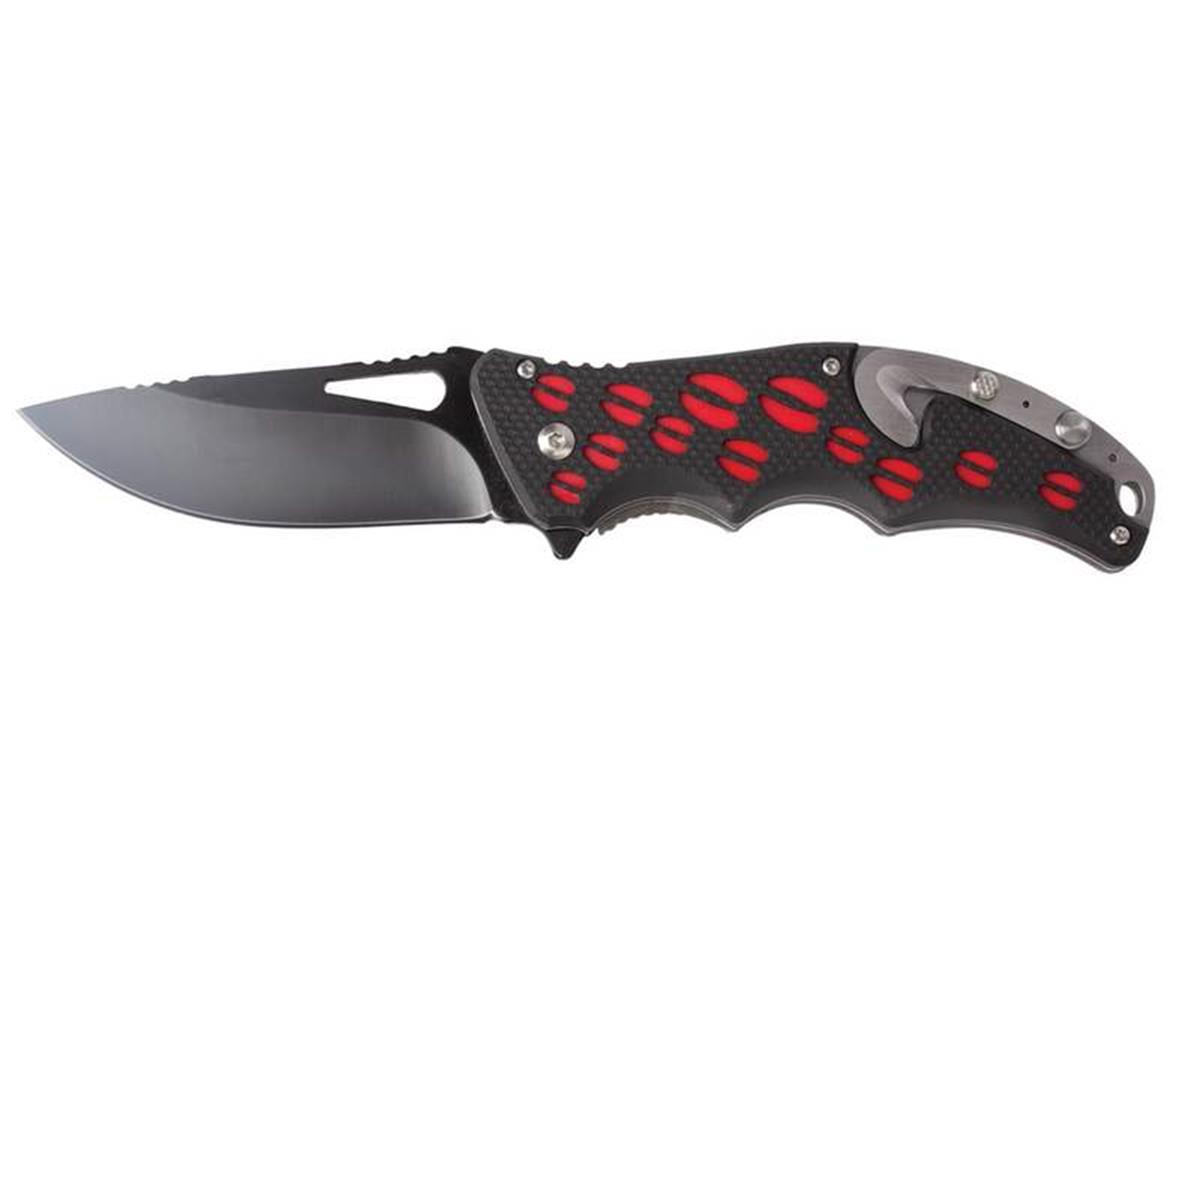 Sksa622 4.75 In. Assisted Opening Knife